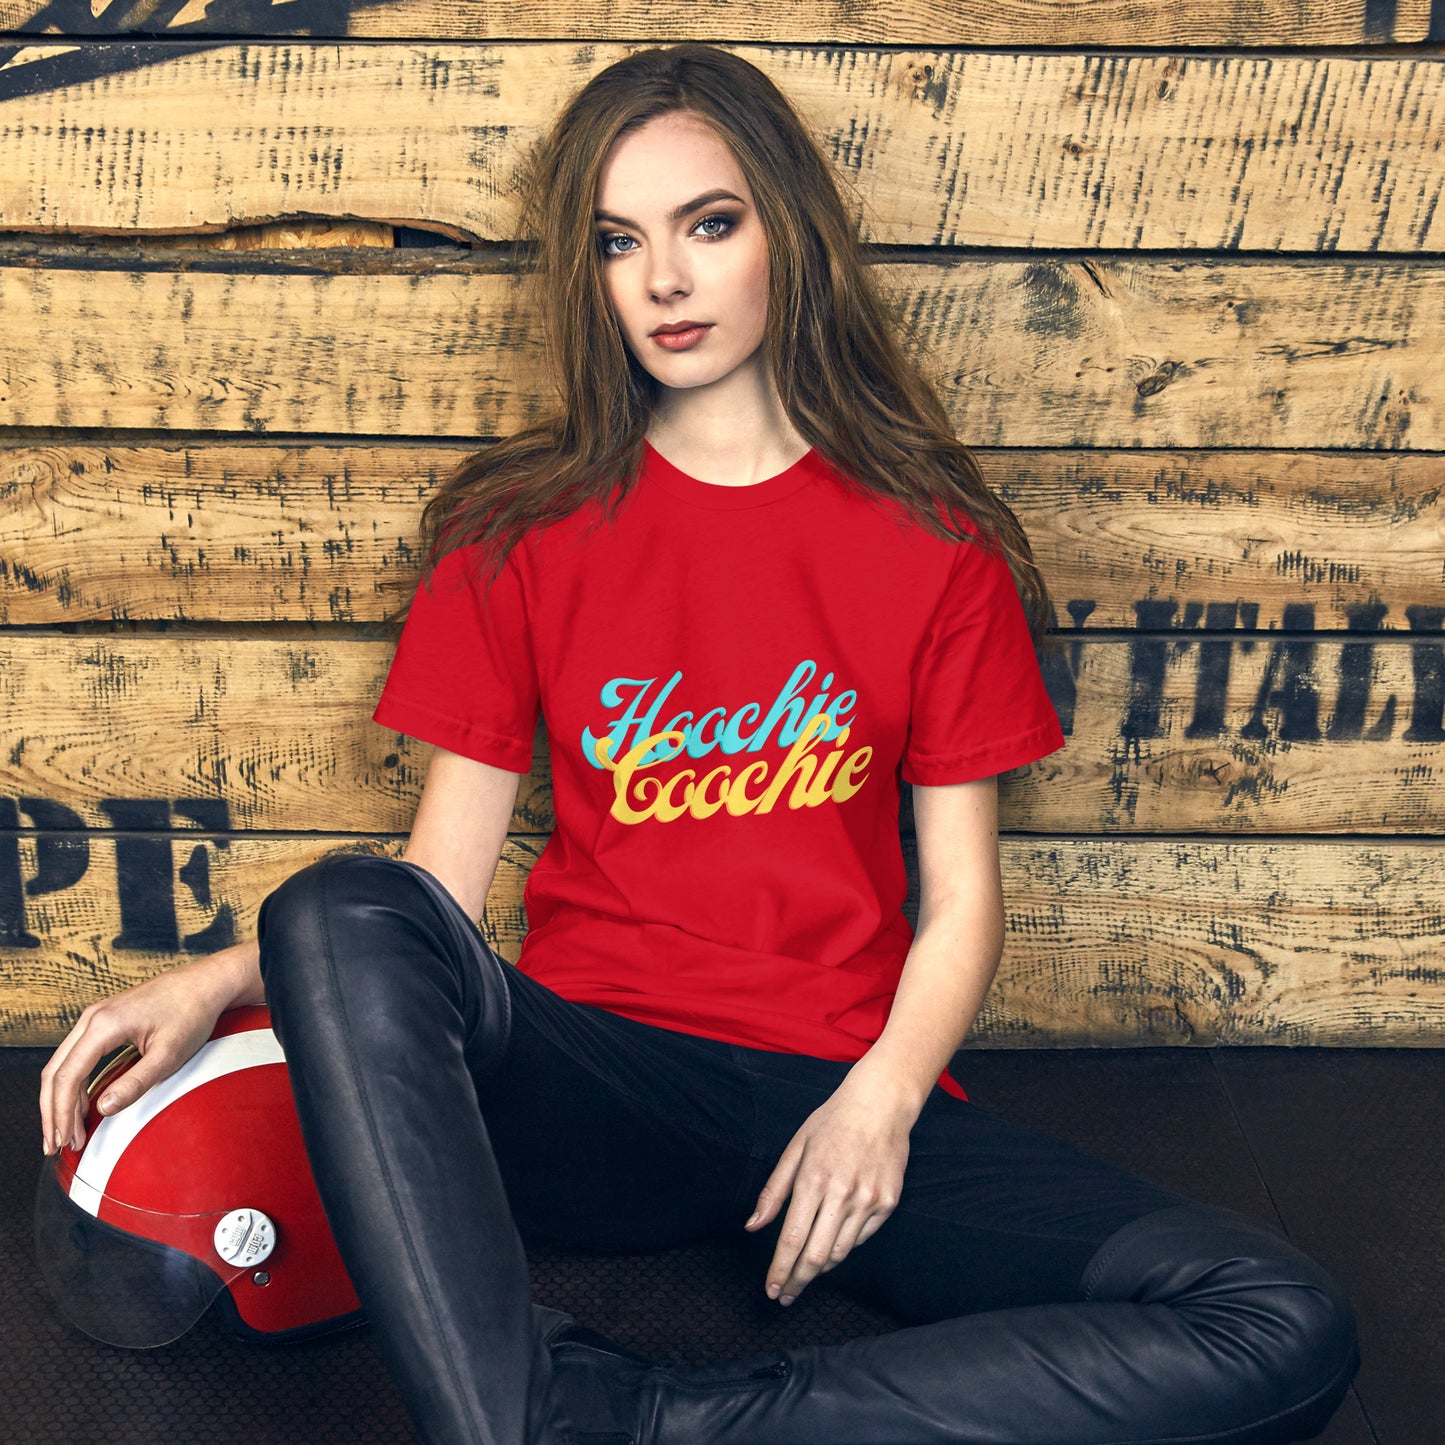 Hoochie - Get Your Twang On with Classic Country Tees - The Ultimate Unisex T-Shirt for True Country Souls! - Classic Country Tees